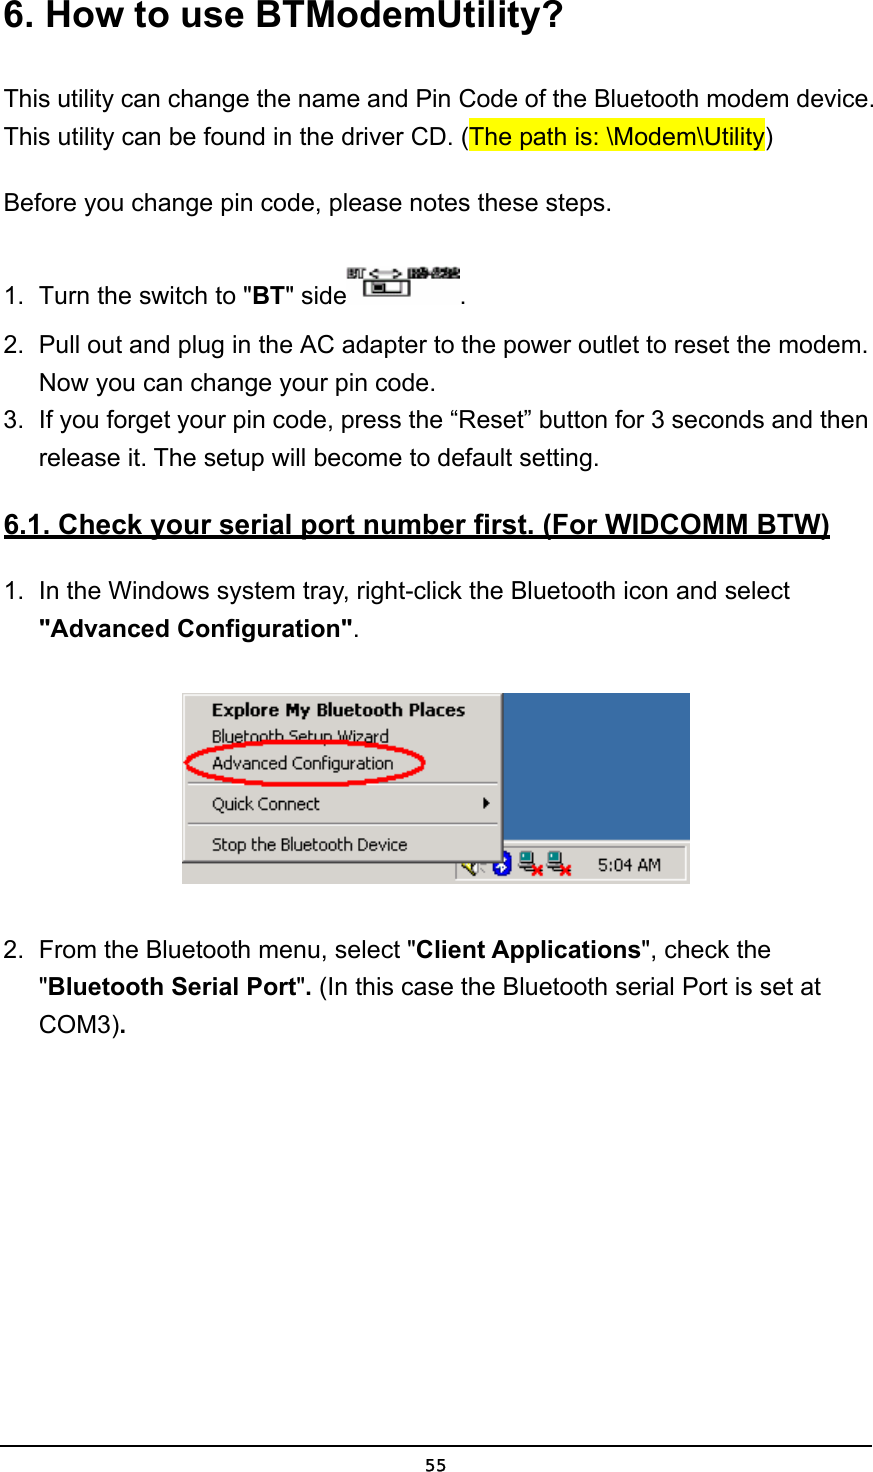   556. How to use BTModemUtility? This utility can change the name and Pin Code of the Bluetooth modem device. This utility can be found in the driver CD. (The path is: \Modem\Utility) Before you change pin code, please notes these steps.   1.  Turn the switch to &quot;BT&quot; side . 2.  Pull out and plug in the AC adapter to the power outlet to reset the modem. Now you can change your pin code. 3.  If you forget your pin code, press the “Reset” button for 3 seconds and then release it. The setup will become to default setting. 6.1. Check your serial port number first. (For WIDCOMM BTW) 1.  In the Windows system tray, right-click the Bluetooth icon and select &quot;Advanced Configuration&quot;.  2.  From the Bluetooth menu, select &quot;Client Applications&quot;, check the &quot;Bluetooth Serial Port&quot;. (In this case the Bluetooth serial Port is set at COM3). 